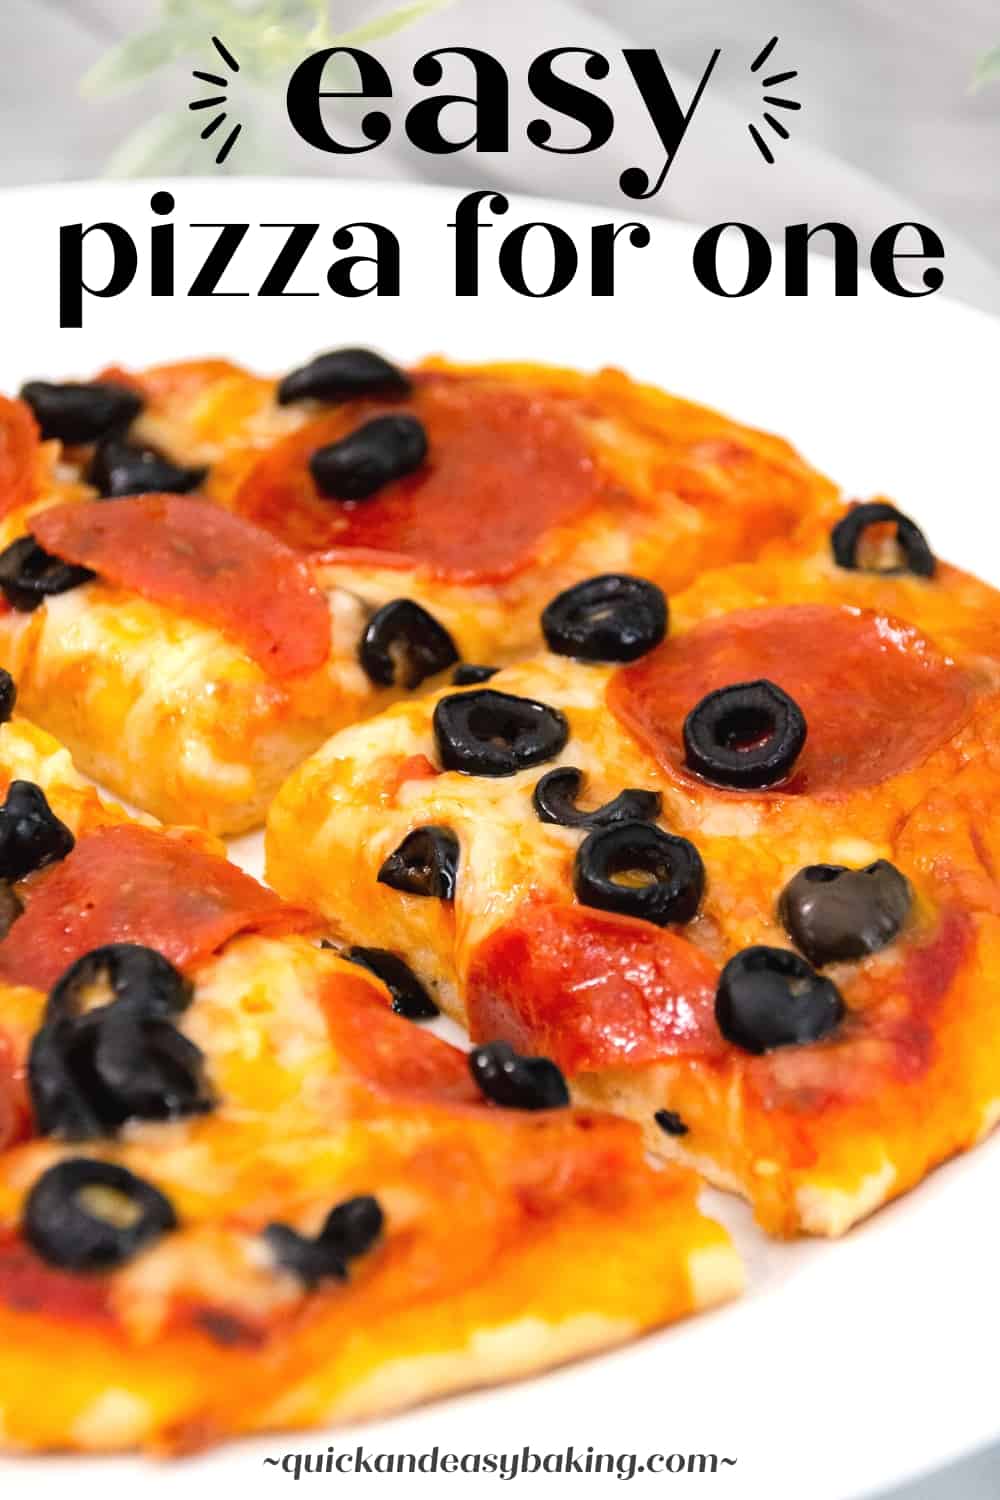 Pinterest image with close up of homemade small pizza with text overlay.